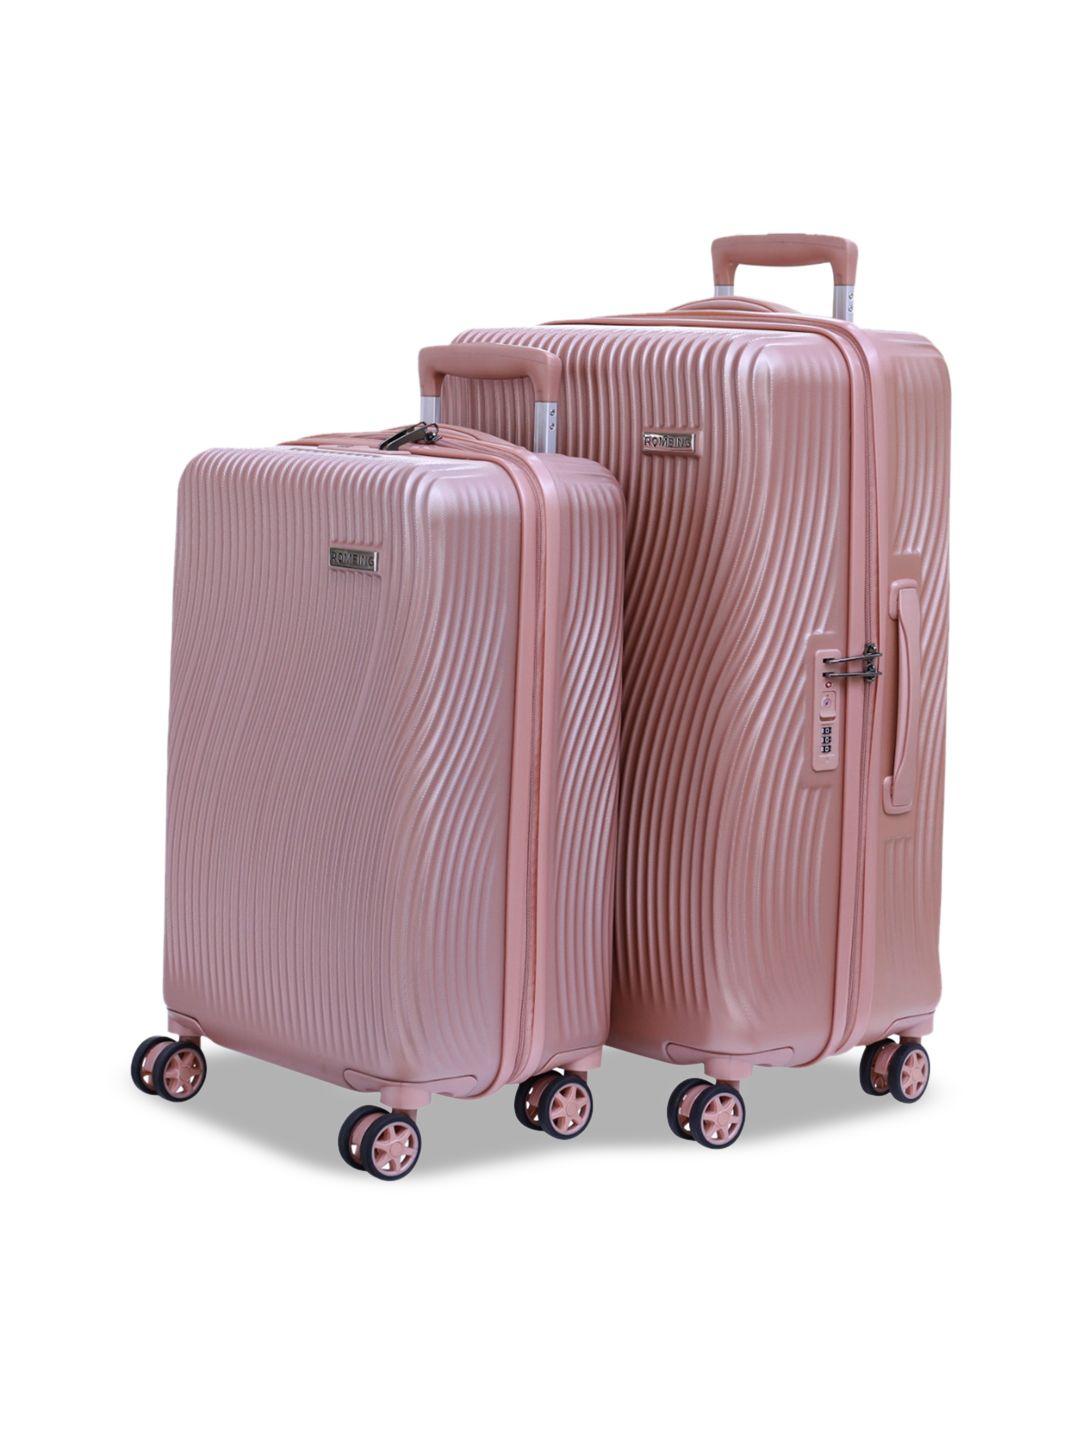 romeing milano set of 2 textured hard-sided trolley suitcase